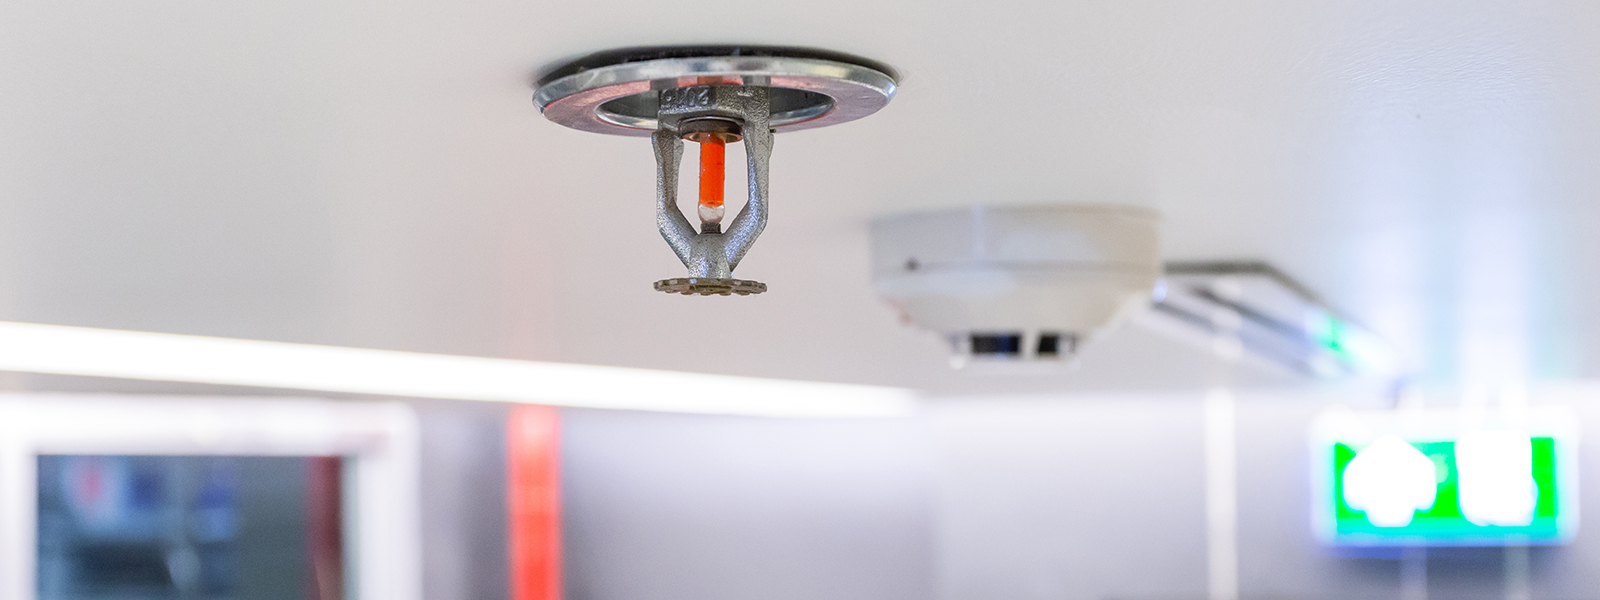 How Important is Maintaining a Fire Sprinkler System for Business?